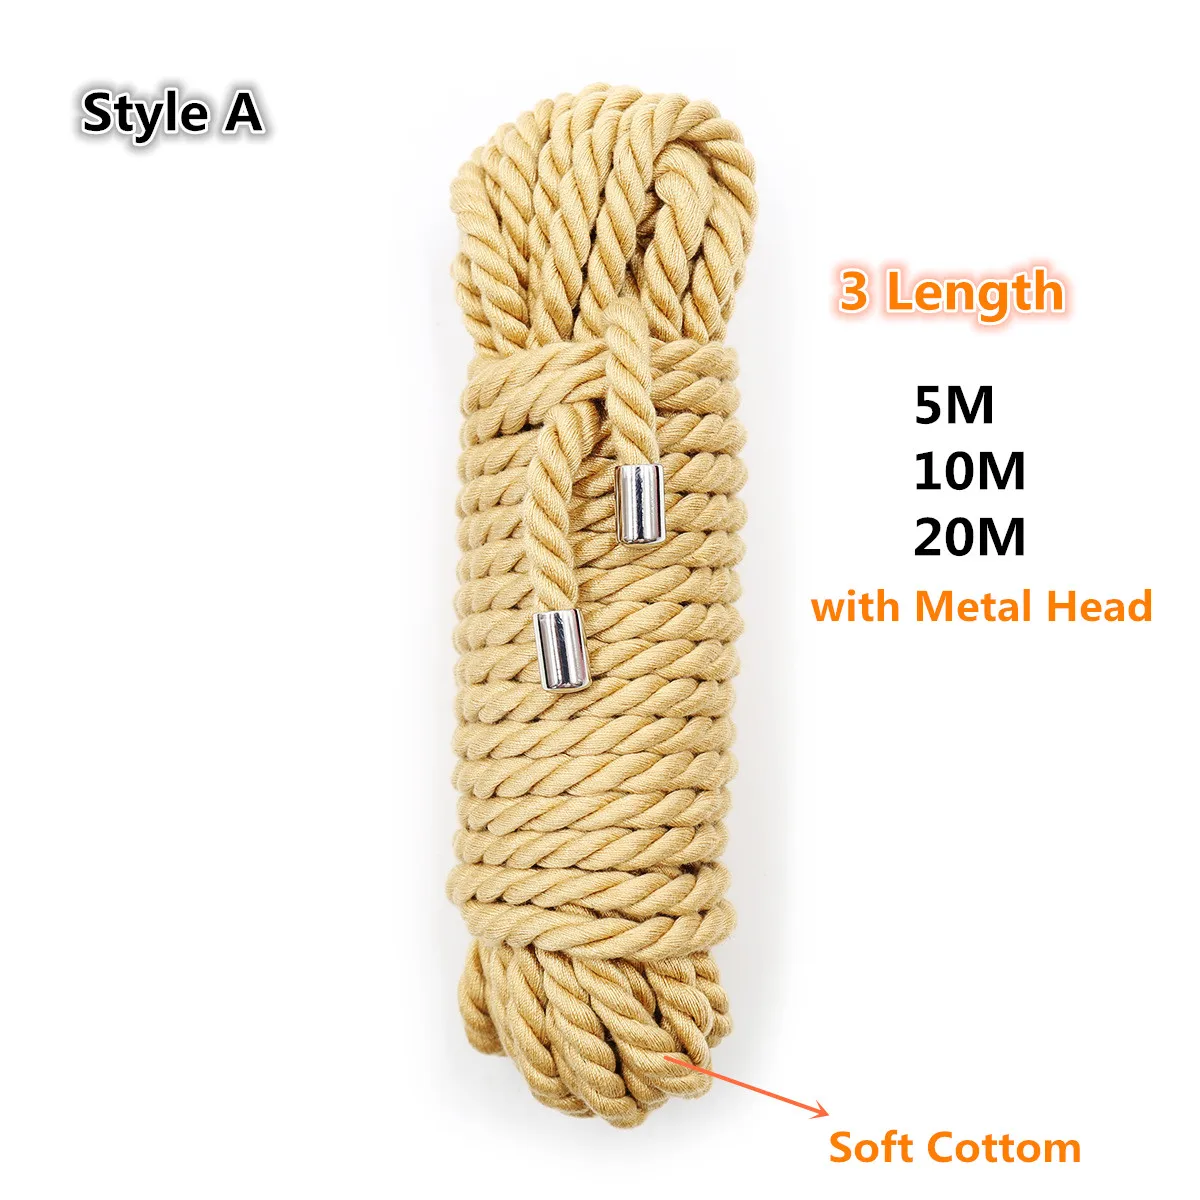 Exotic Shibari Accessory of Handcuffs Bondage Rope for Men Women Fetish Bdsm Slave Role Play Binder Restraint Touch Tie Up Fun